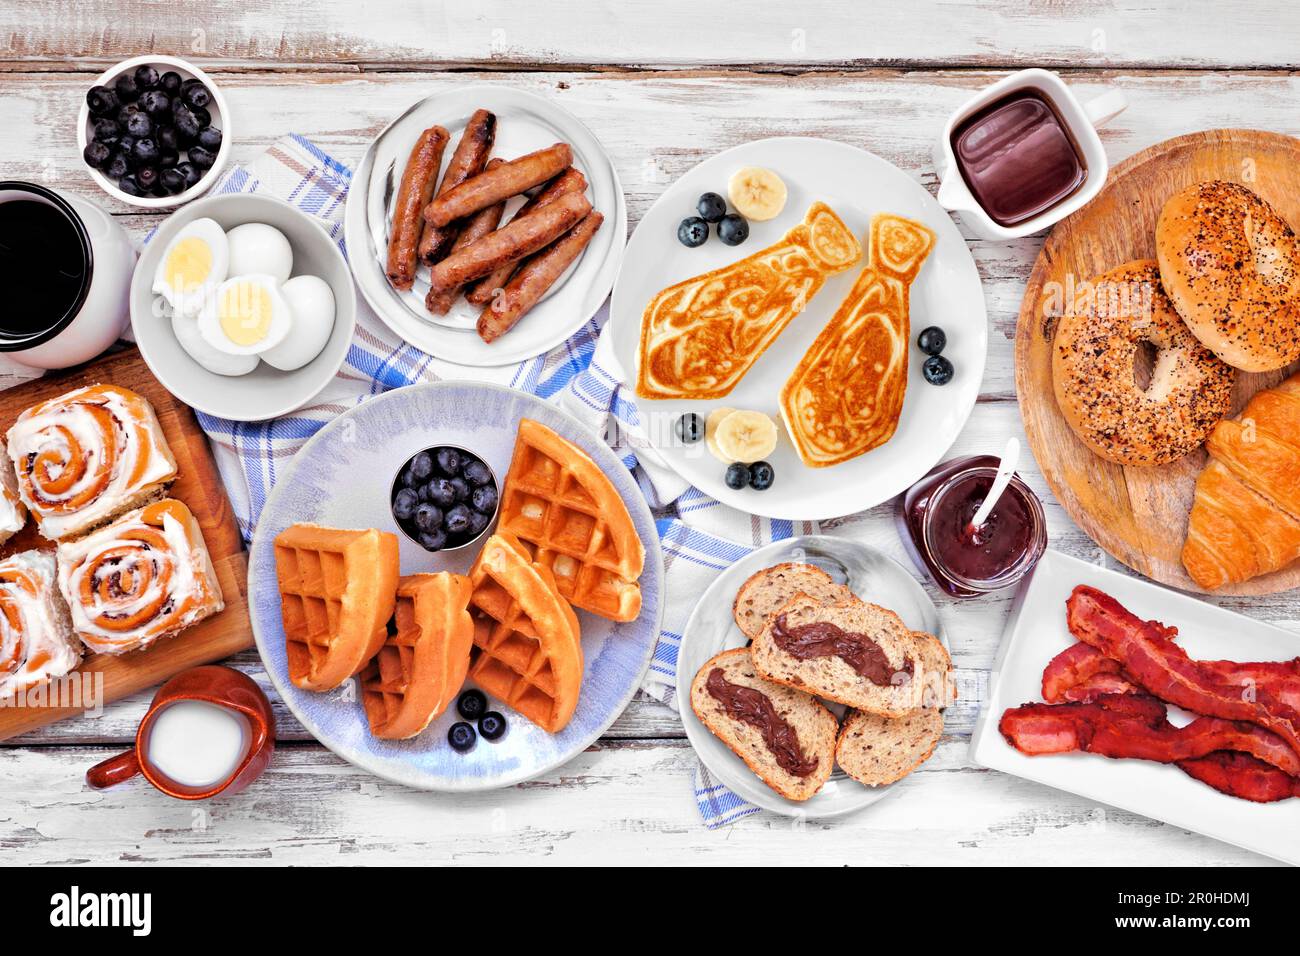 Fathers Day breakfast table scene. Overhead view on a white wood background. Tie pancakes, mustache toast and a selection of dad themed food. Stock Photo